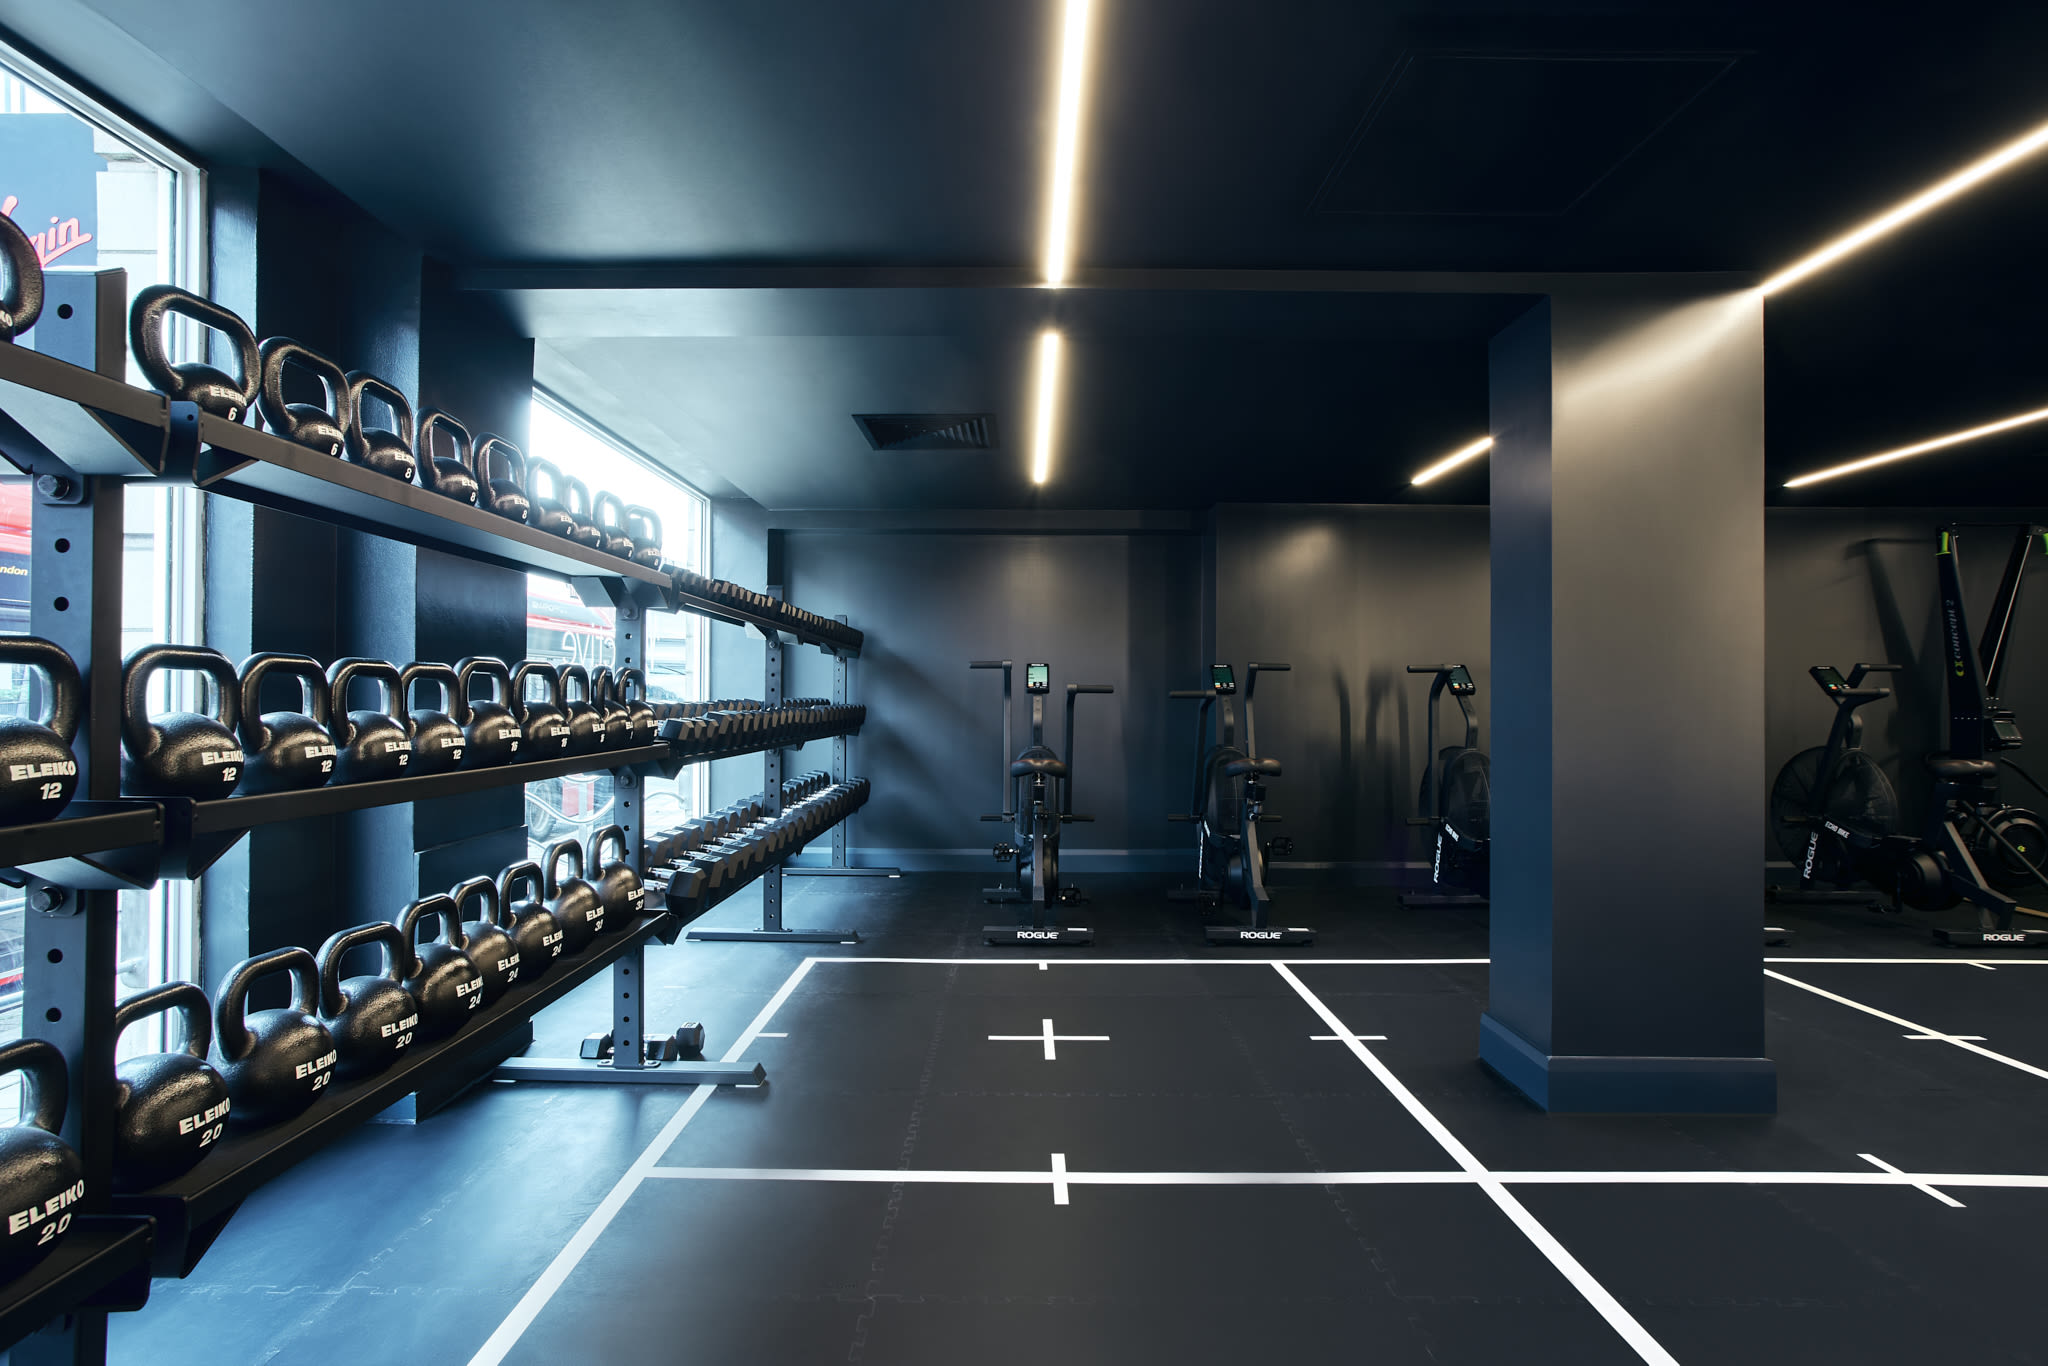 Gym floor with kettle bells on the left hand side and ergonomic bikes in the background